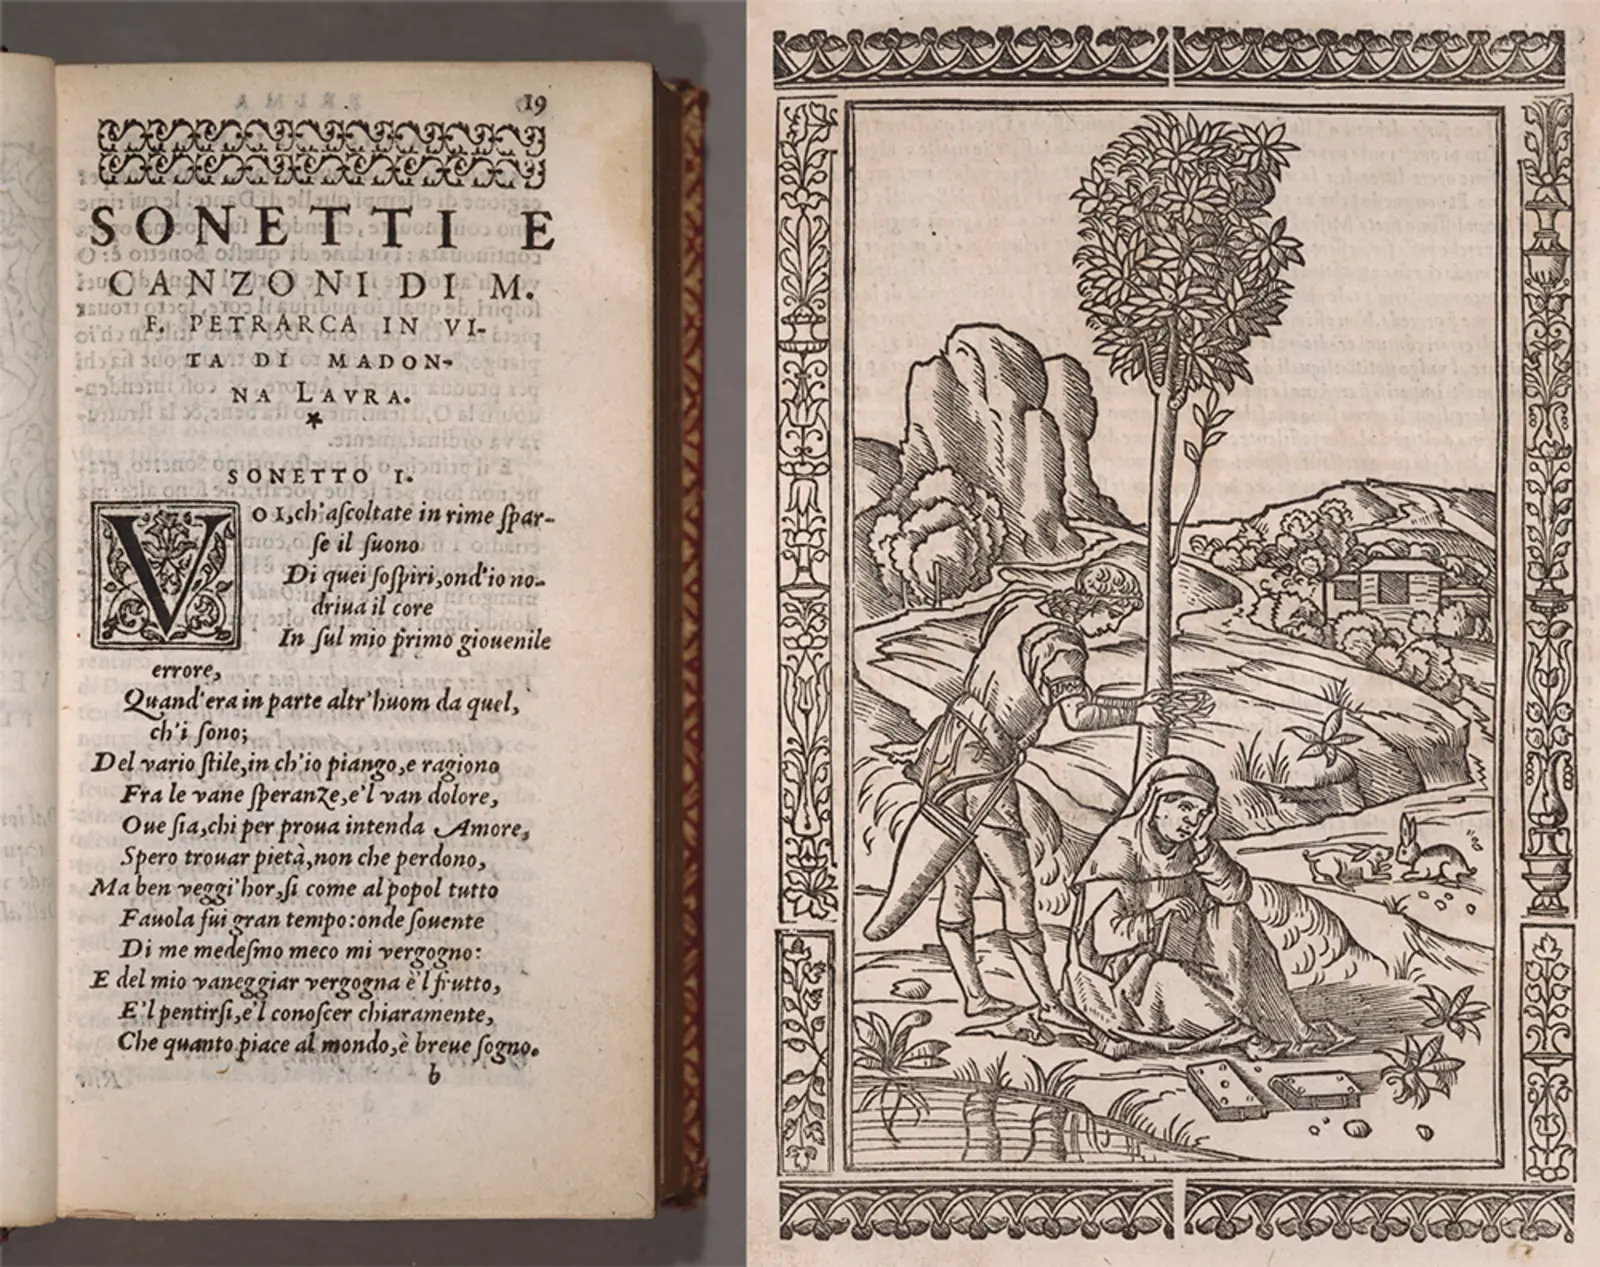 Two images of book pages: on the left is French text and on the right is an illustration of a pastoral scene.